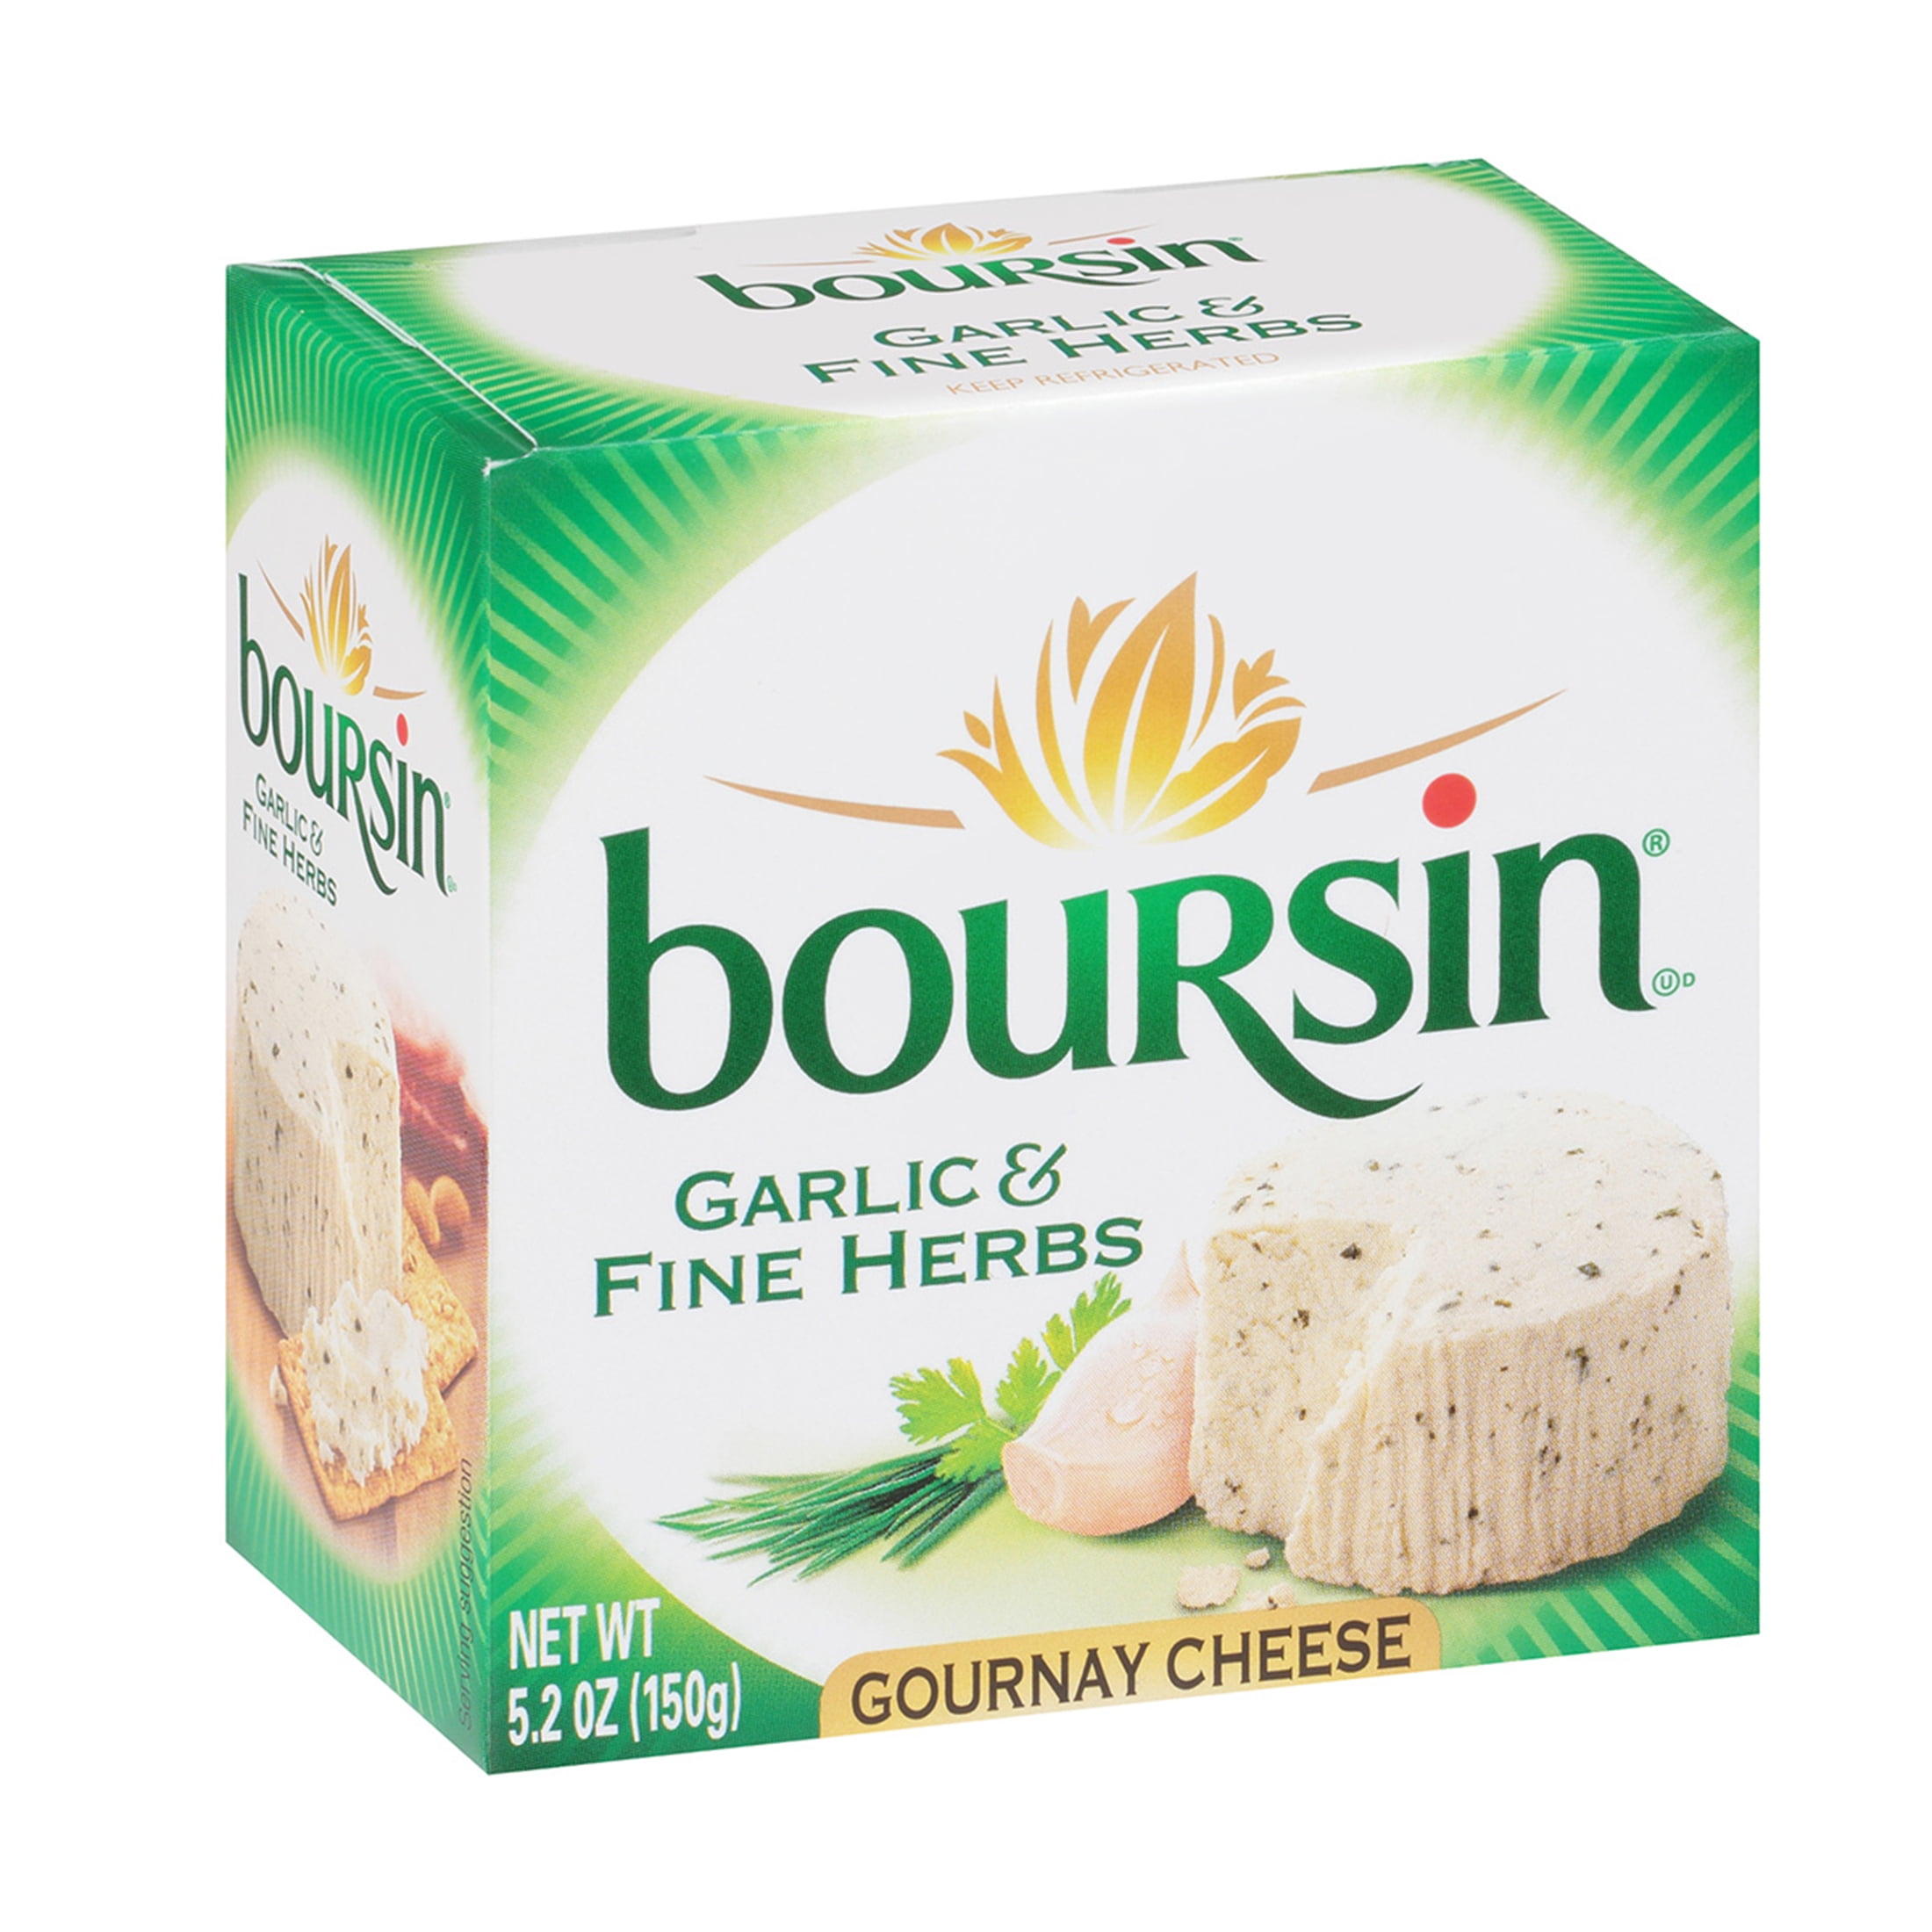 Boursin Garlic & Fine Herbs Spreadable Gournay Cheese, 5.2 oz., Puck in a  Box. Refrigerated